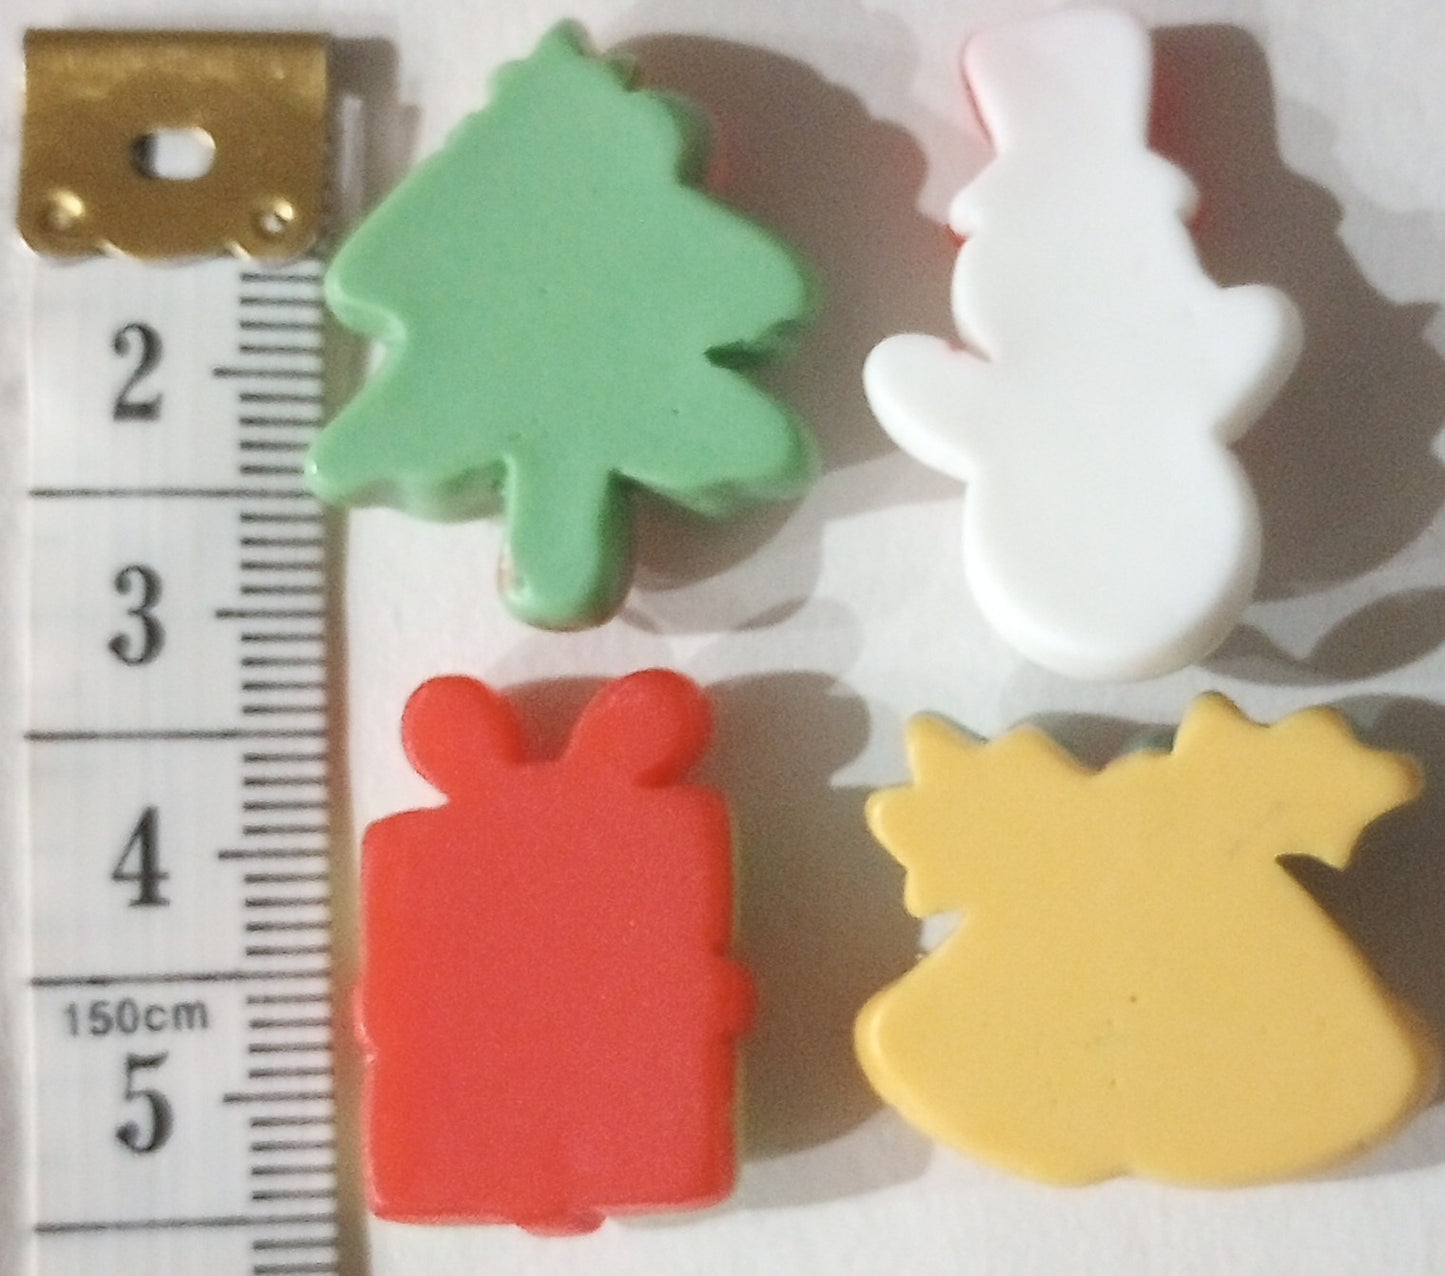 Christmas Mix Charms - 10 per pack